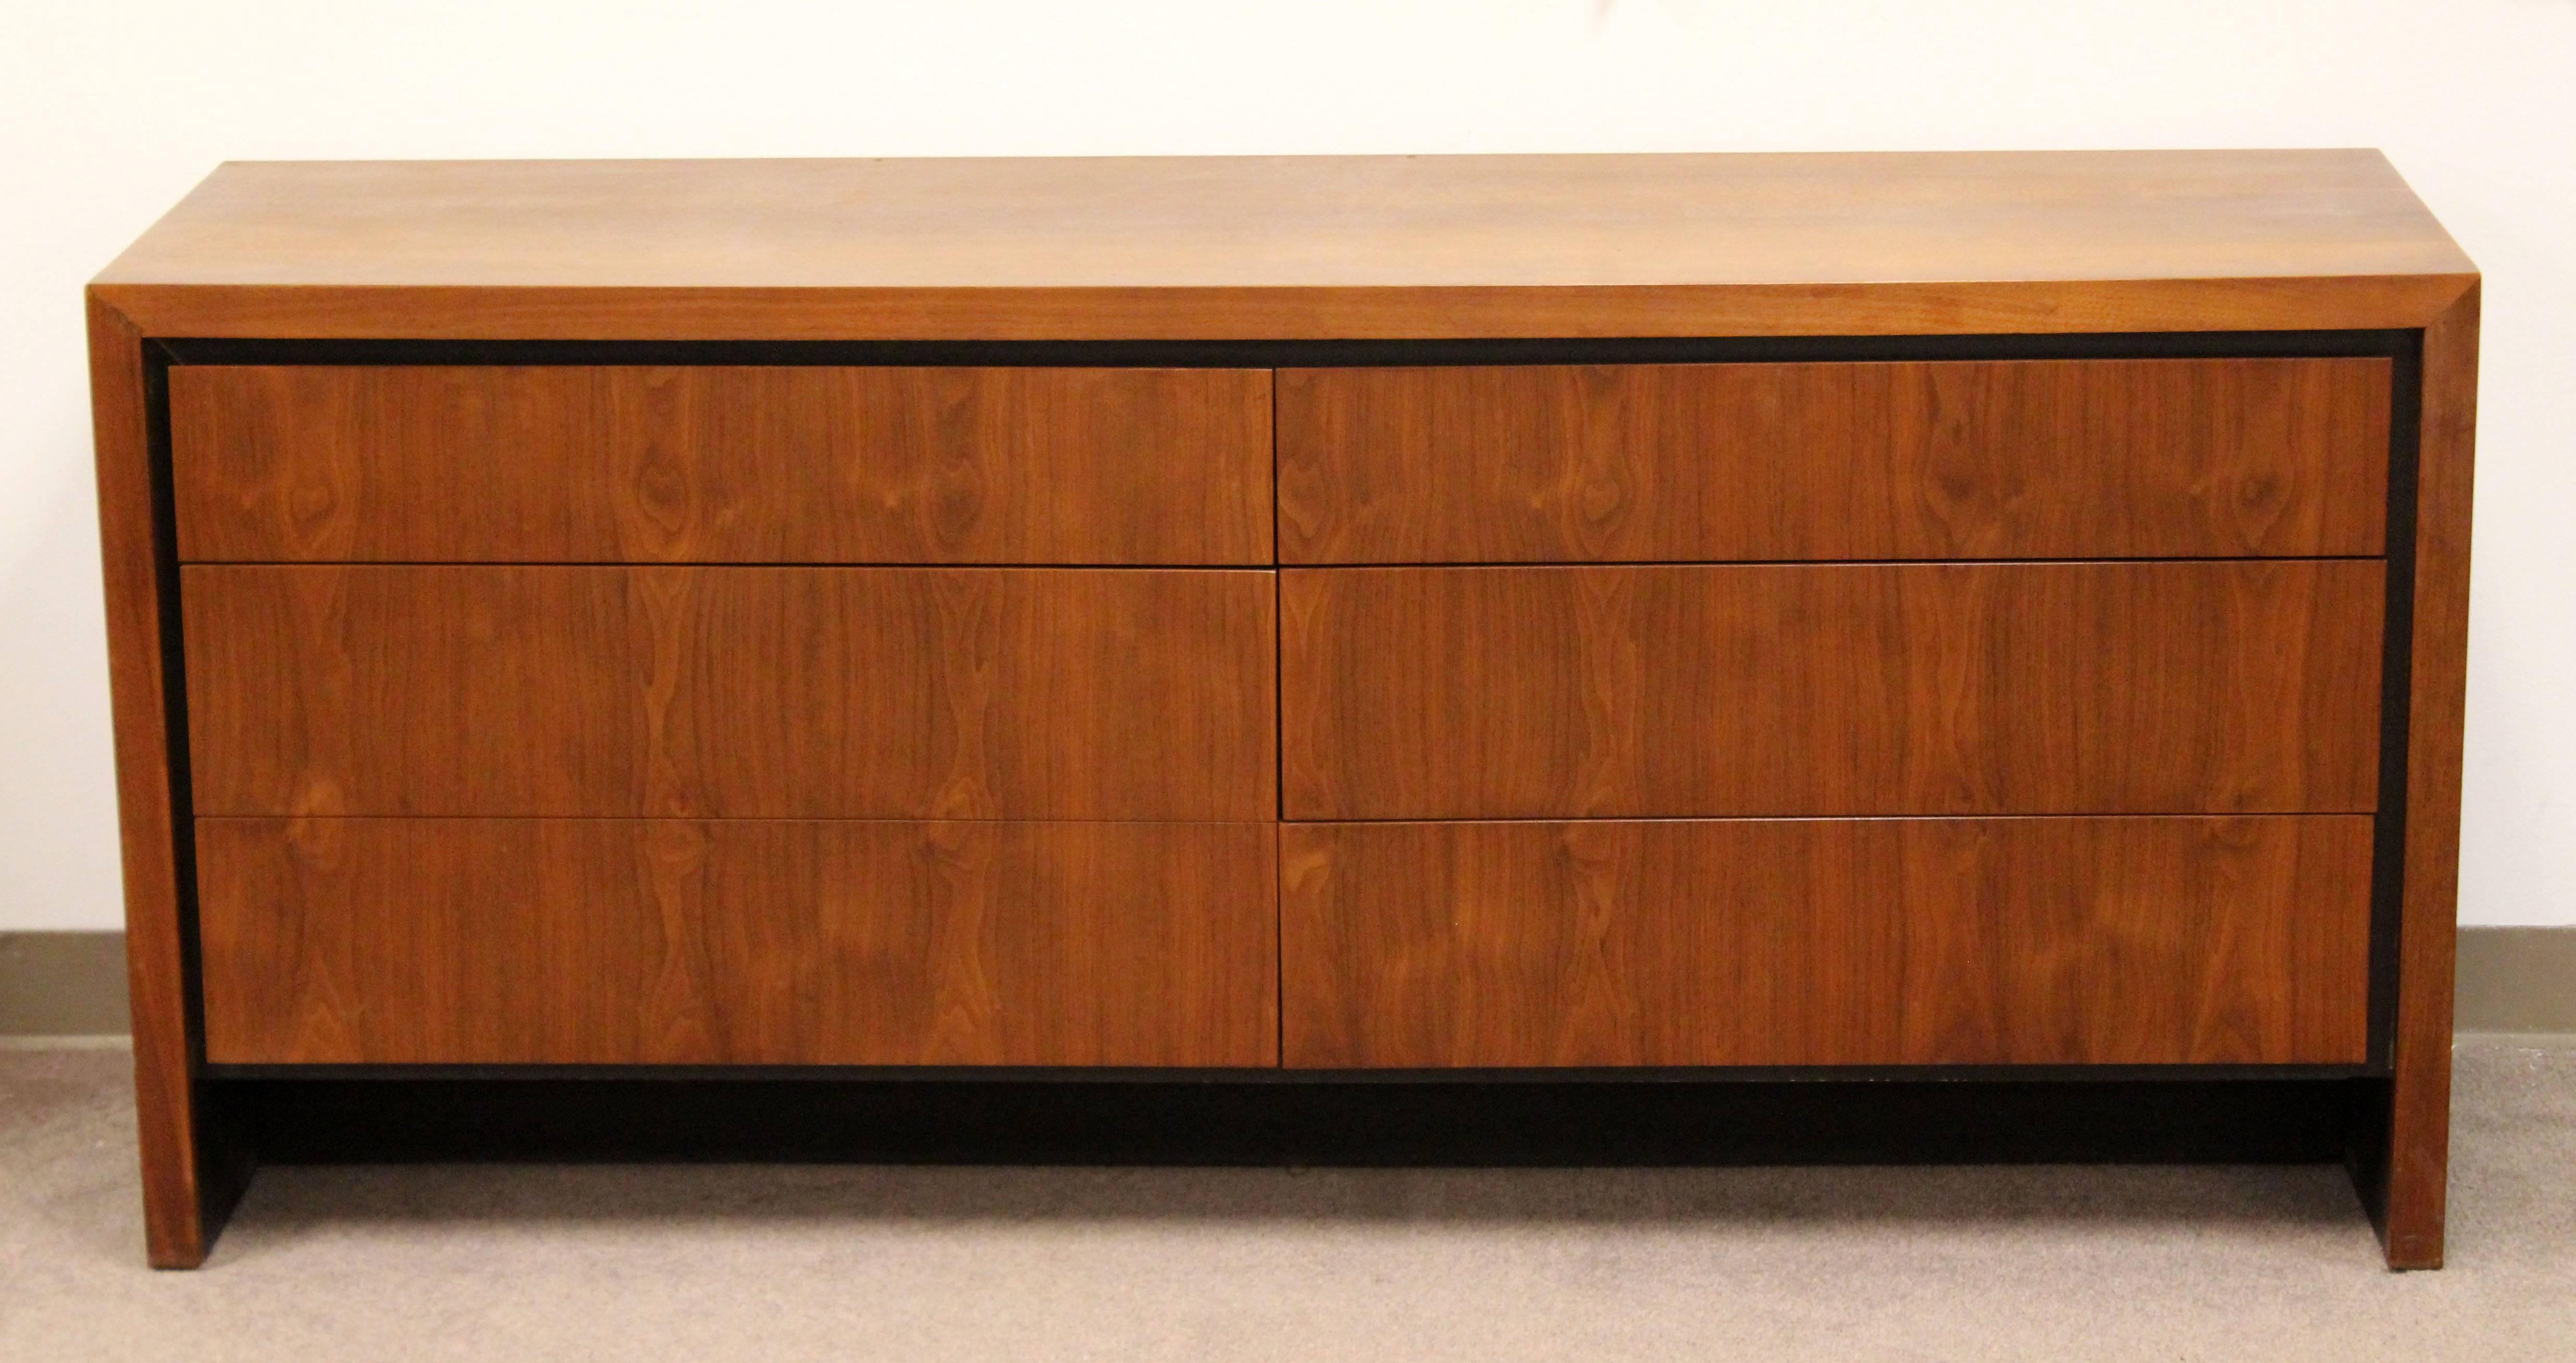 For your consideration is a gorgeous, walnut, six drawer dresser or credenza with black trim, designed by Merton Gershun for Dillingham, circa 1960s. In excellent condition. The dimensions are 66